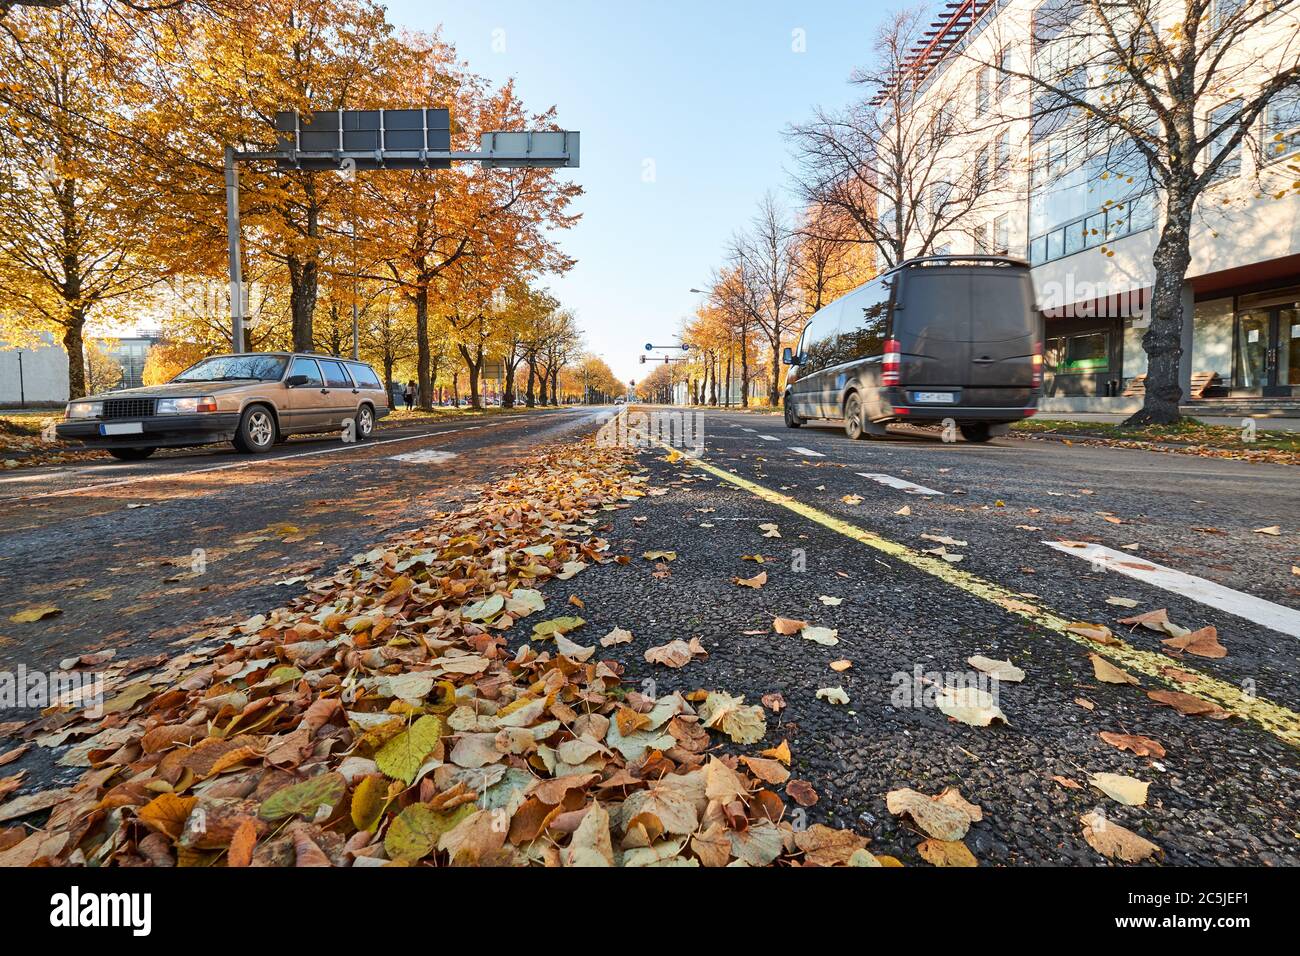 Street with moving car, autumn trees and leaves all around in the center of city. Finland Stock Photo